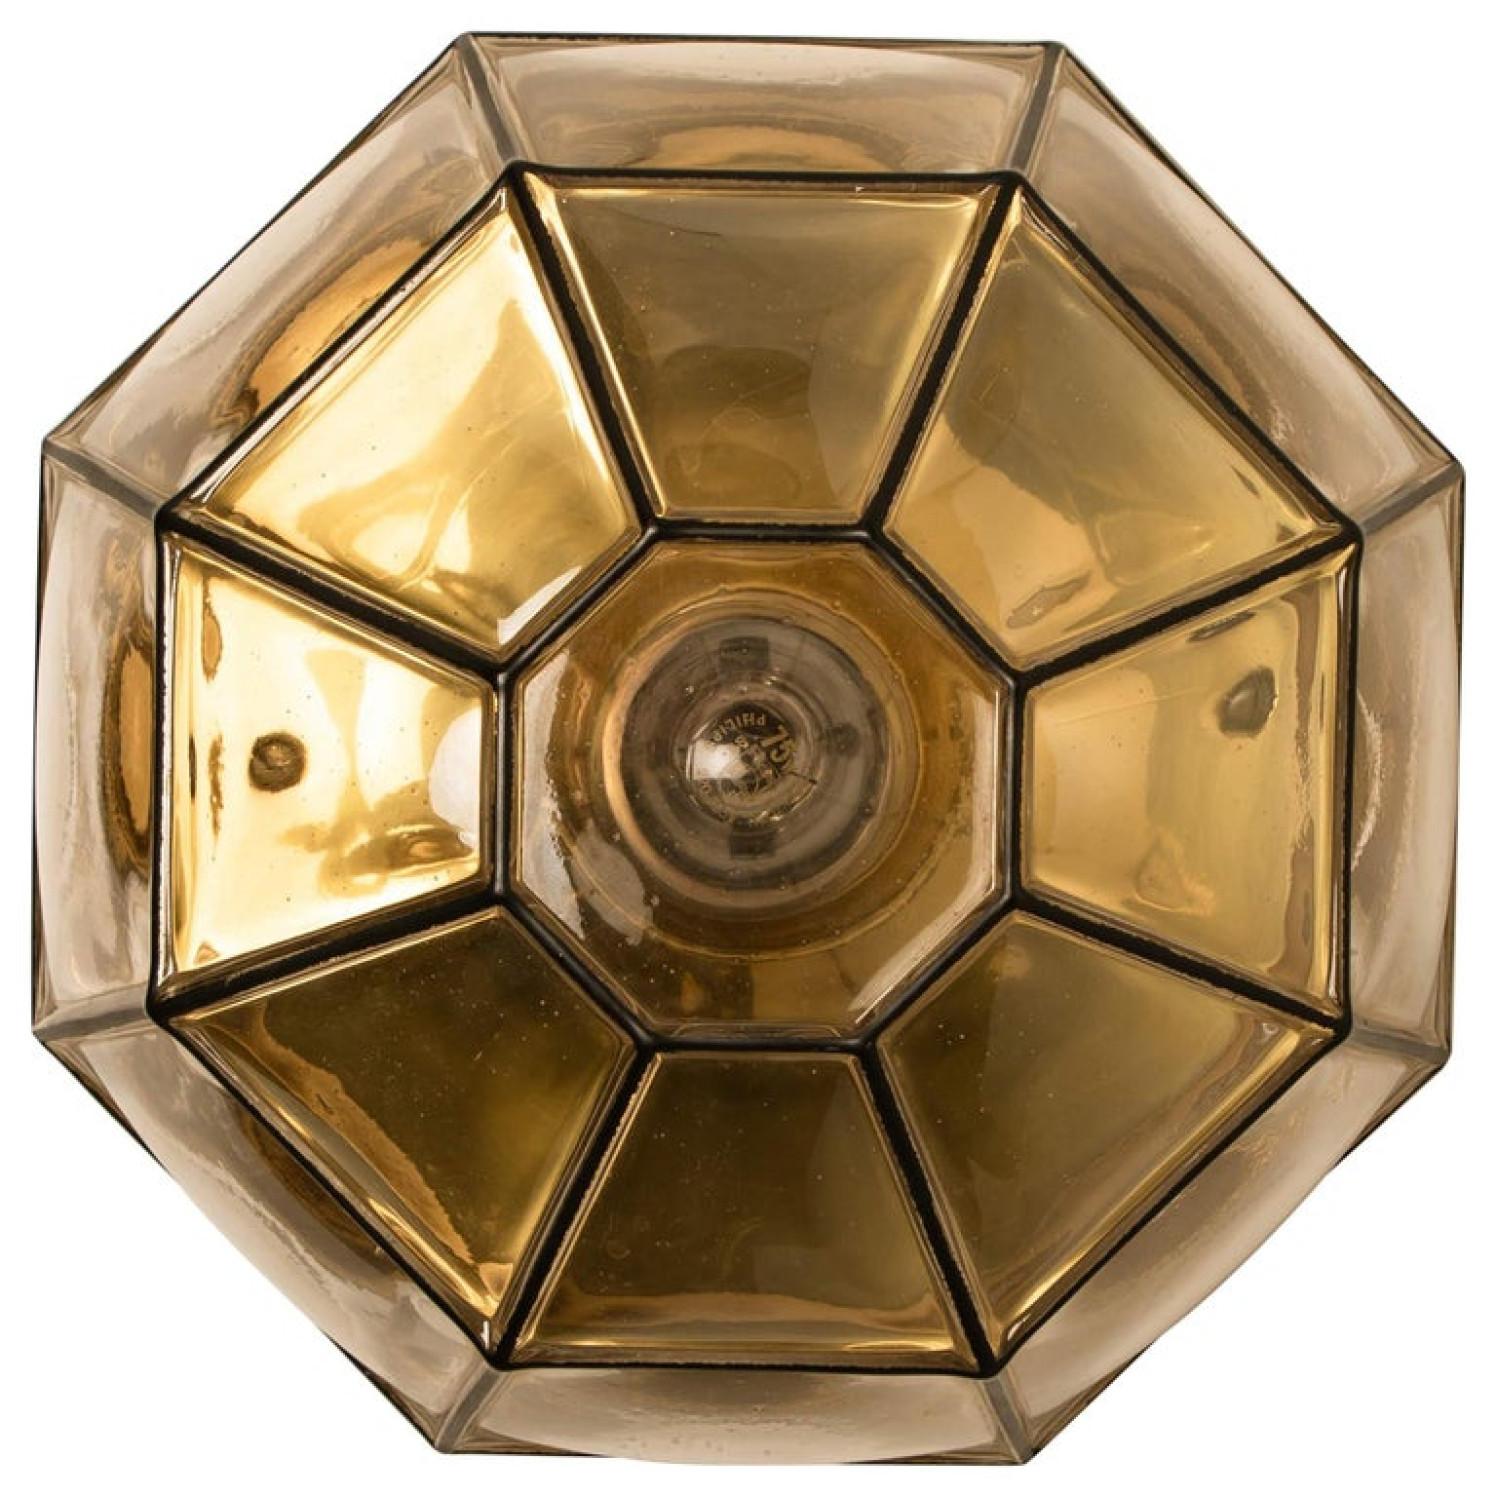 This beautiful and unique octagonal glass light flush mount or wall light was manufactured by Glashütte Limburg in Germany during the 1960s (late 1960s or early 1970s). Nice craftsmanship. Elaborate clear bubble glass which bulges slightly out of